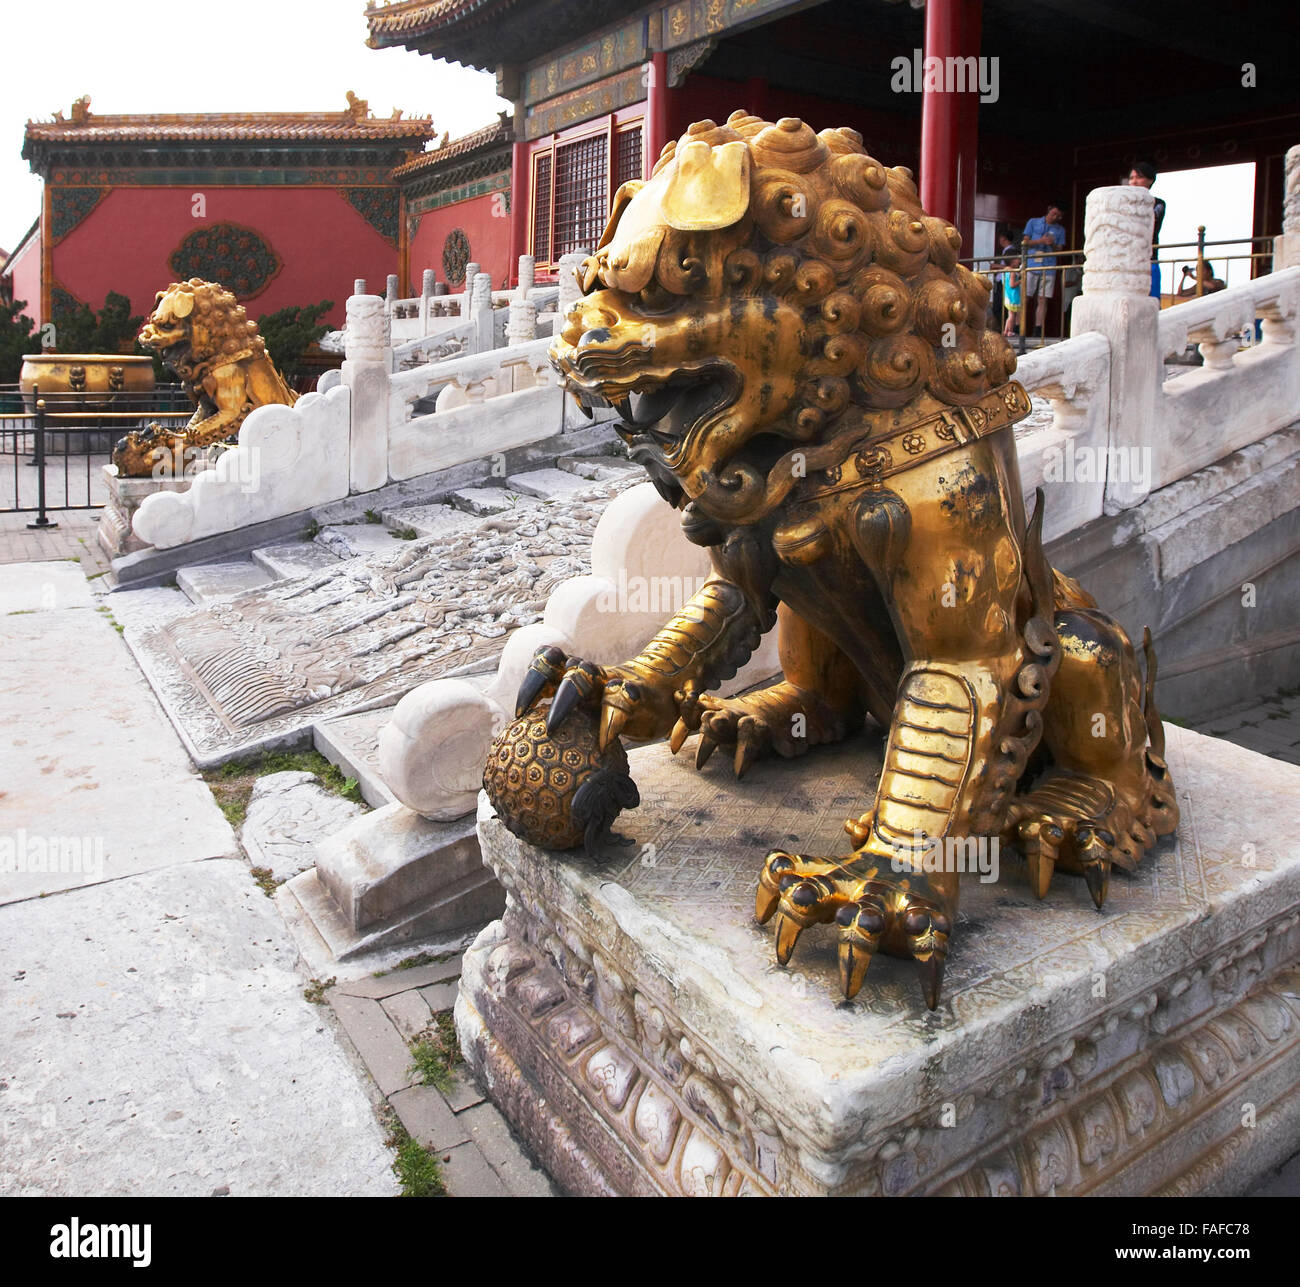 Golden Lions and Imperial Palace in the Forbidden City in Beijing China Stock Photo